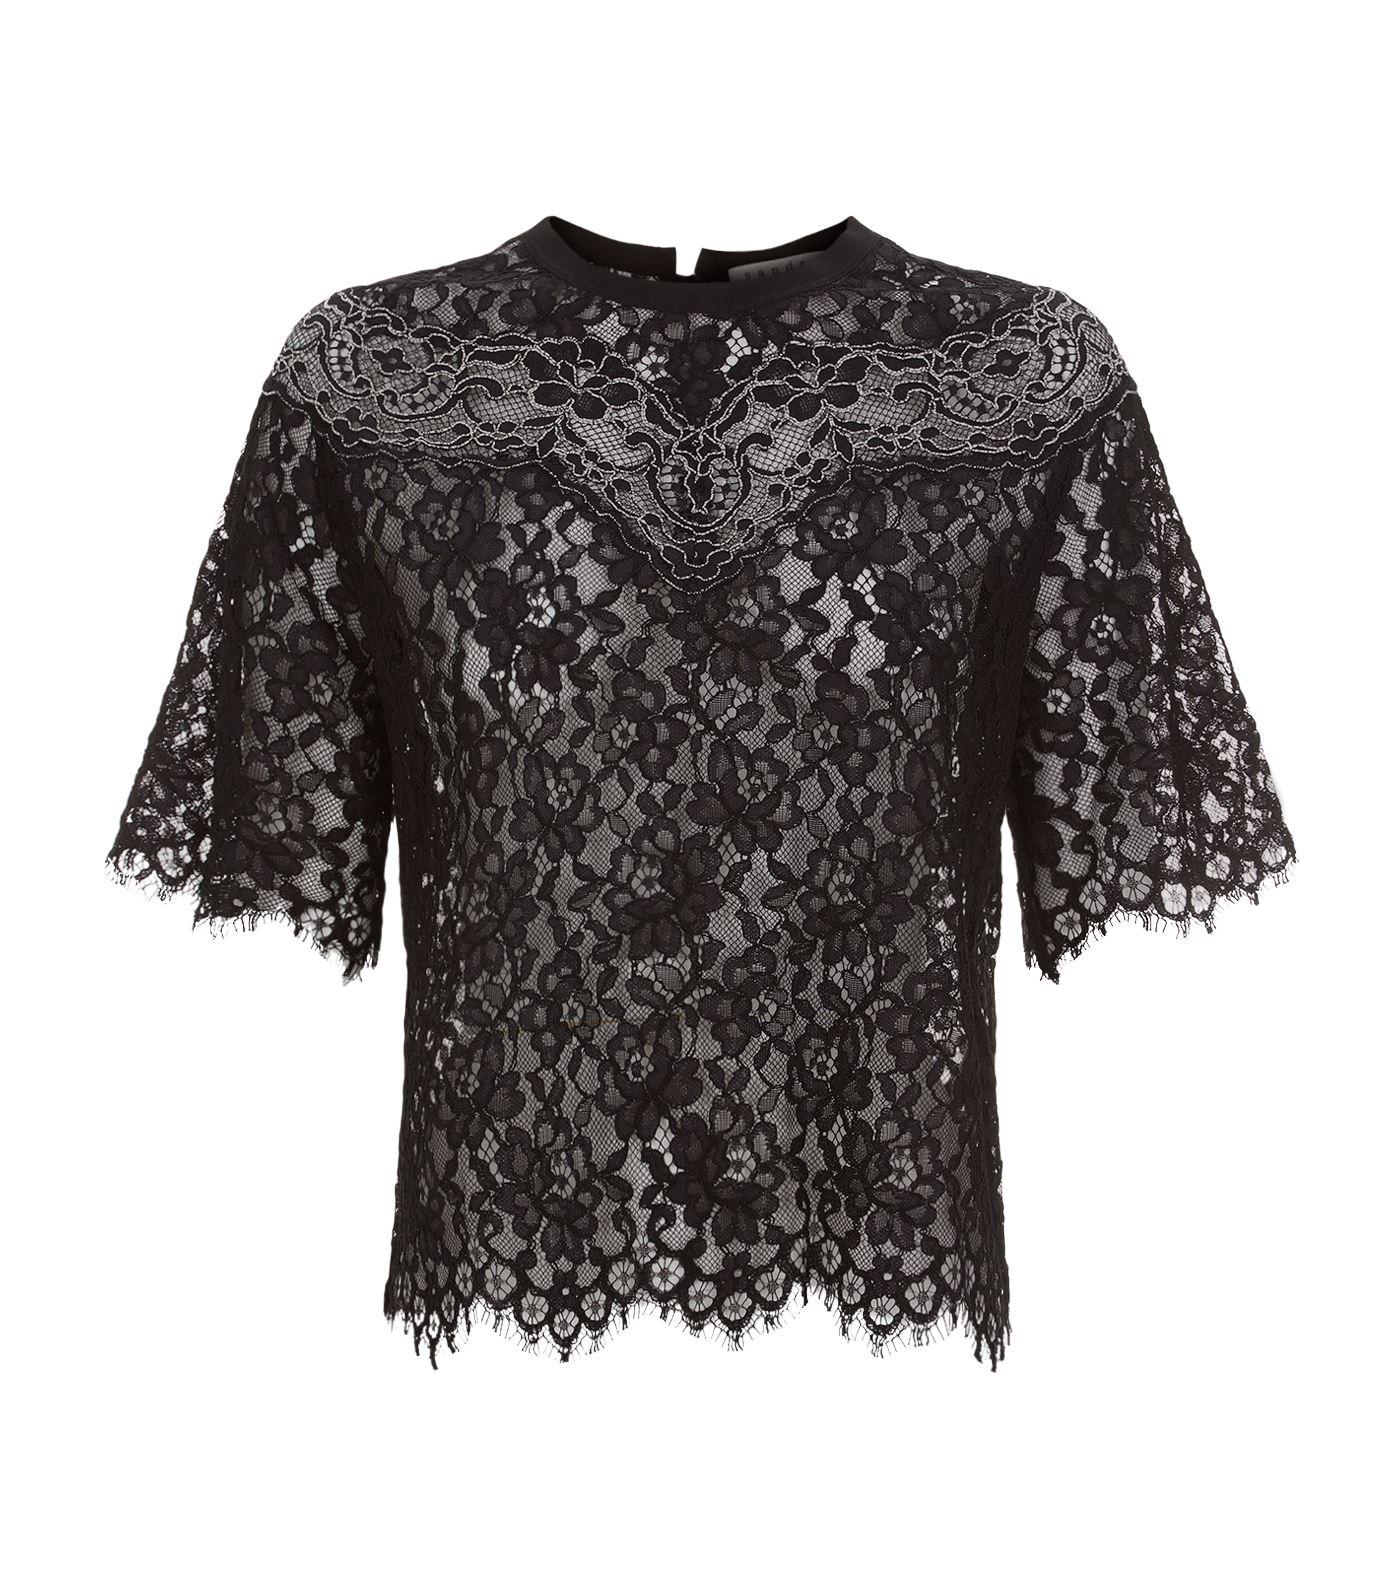 Lyst - Sandro Embroidered Lace Top in Black